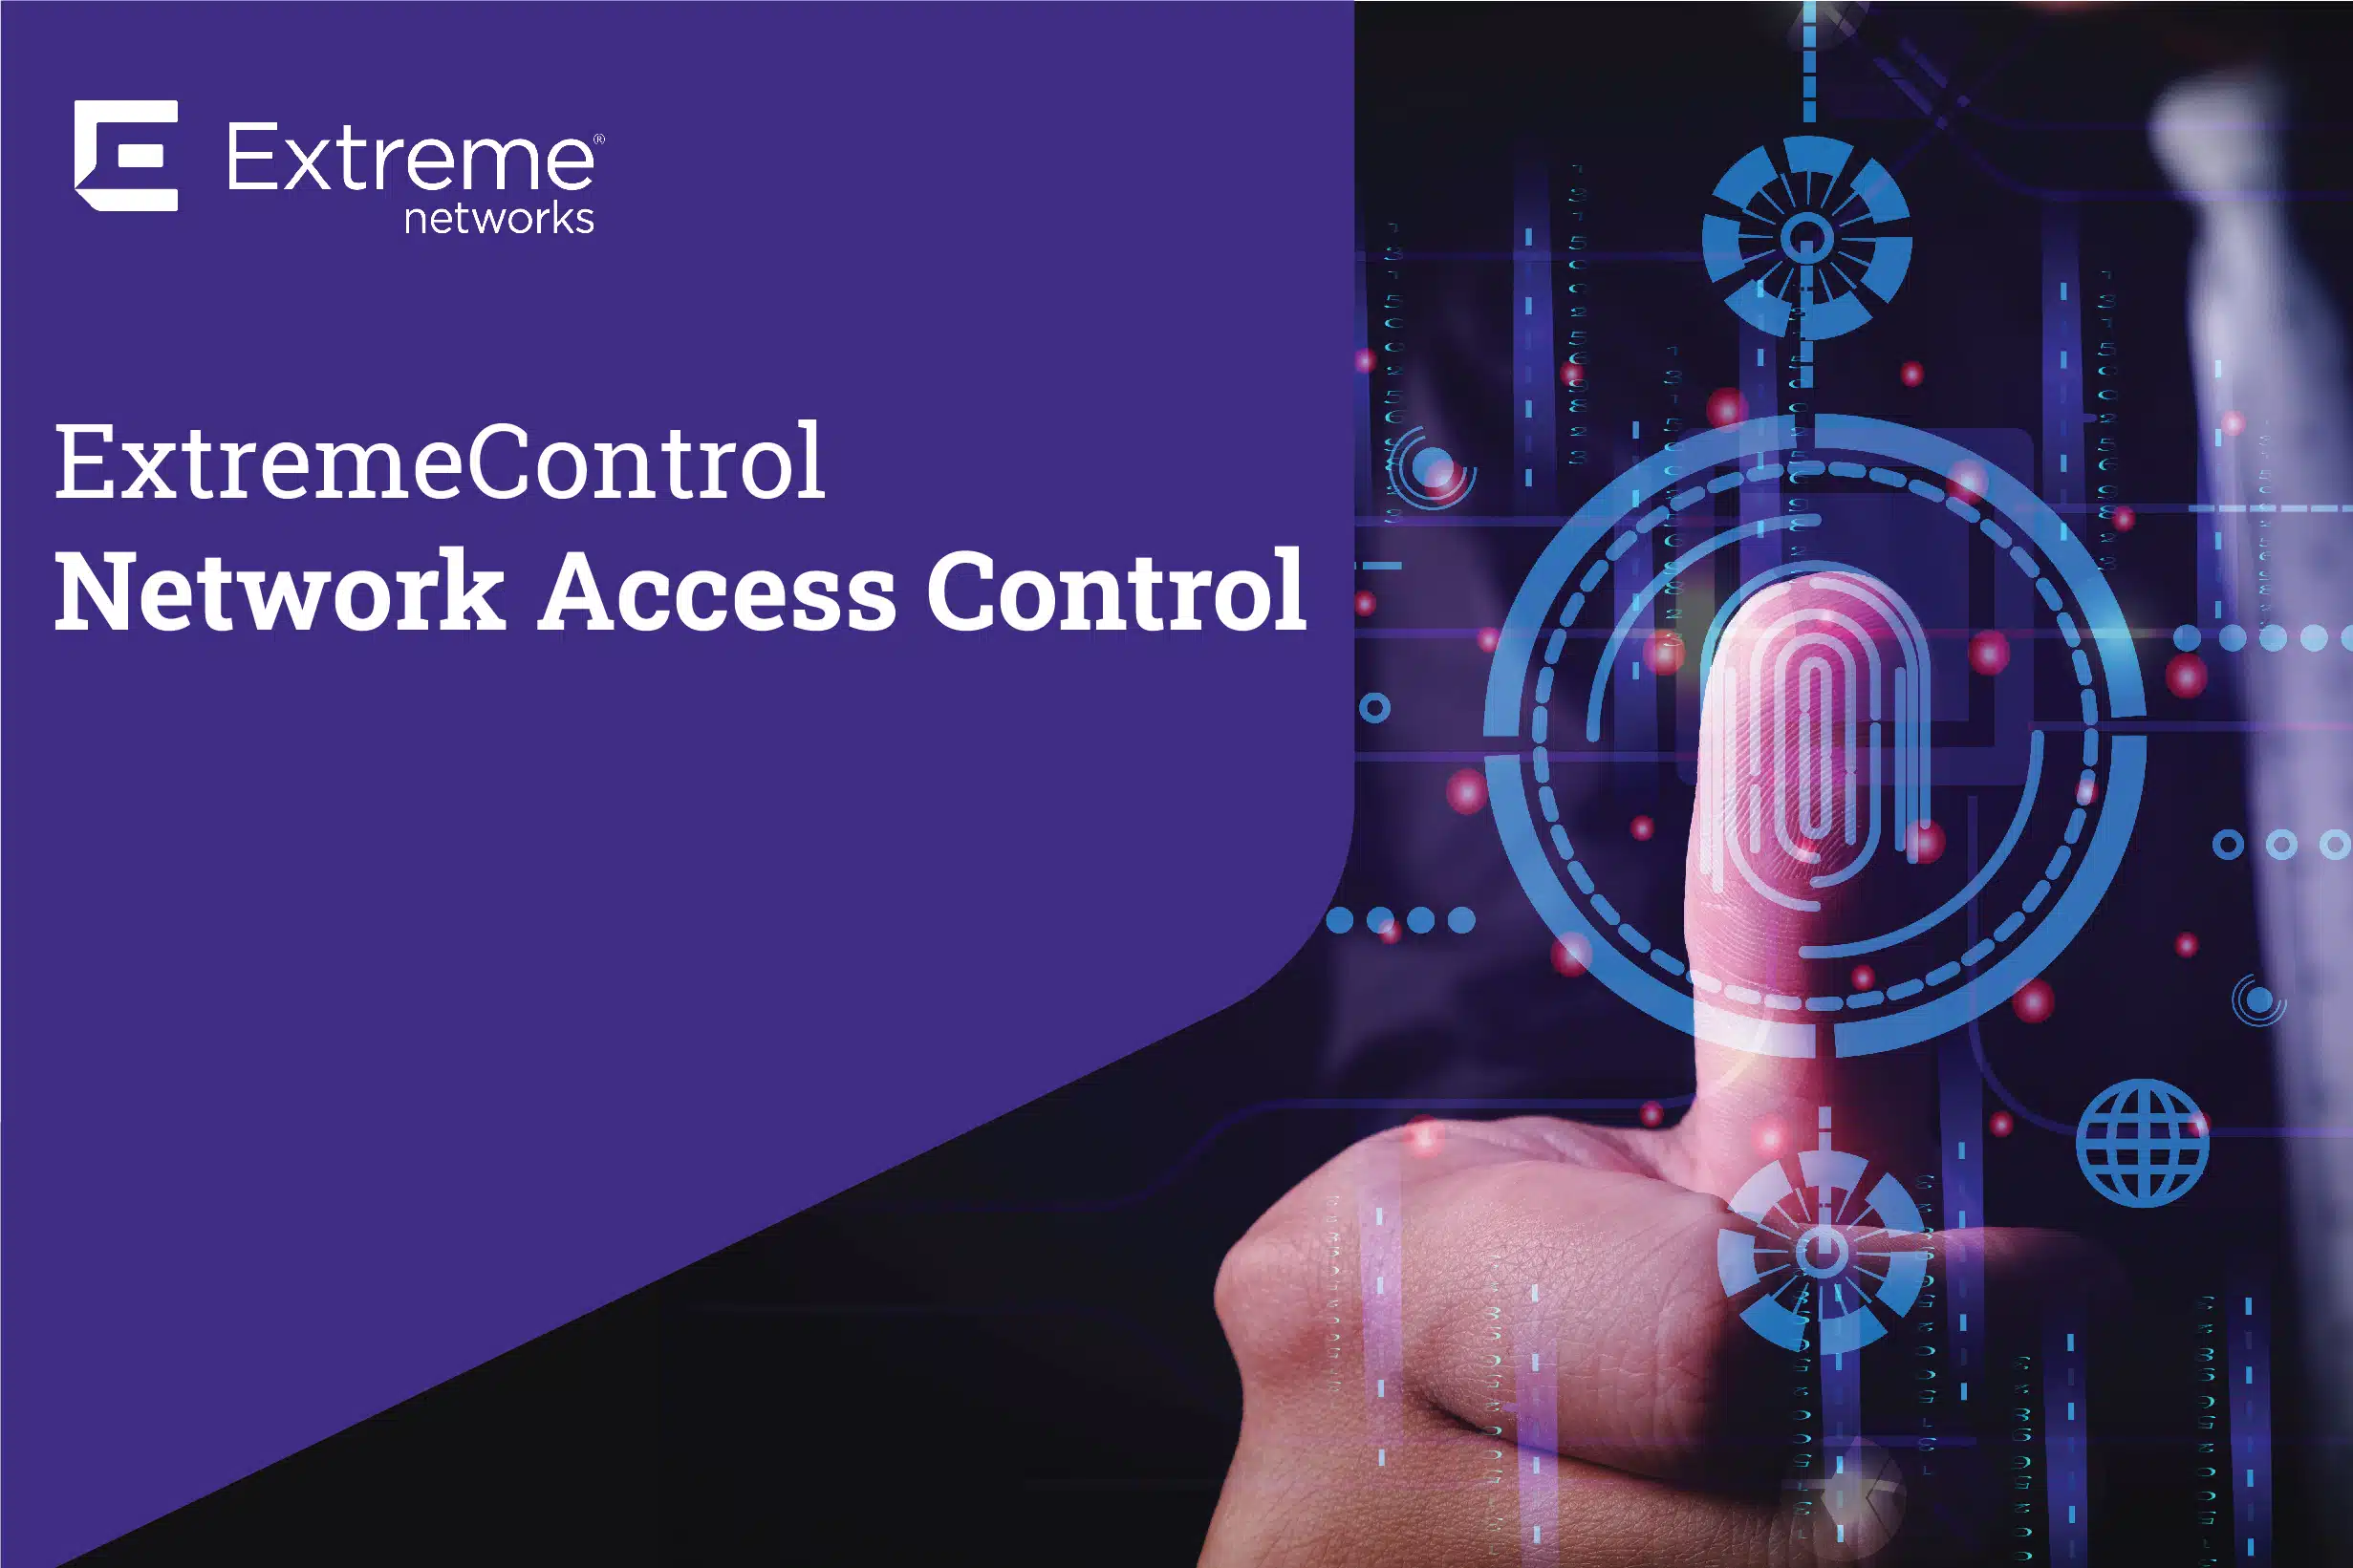 ExtremeControl Network Access Control keeps your network edge secure